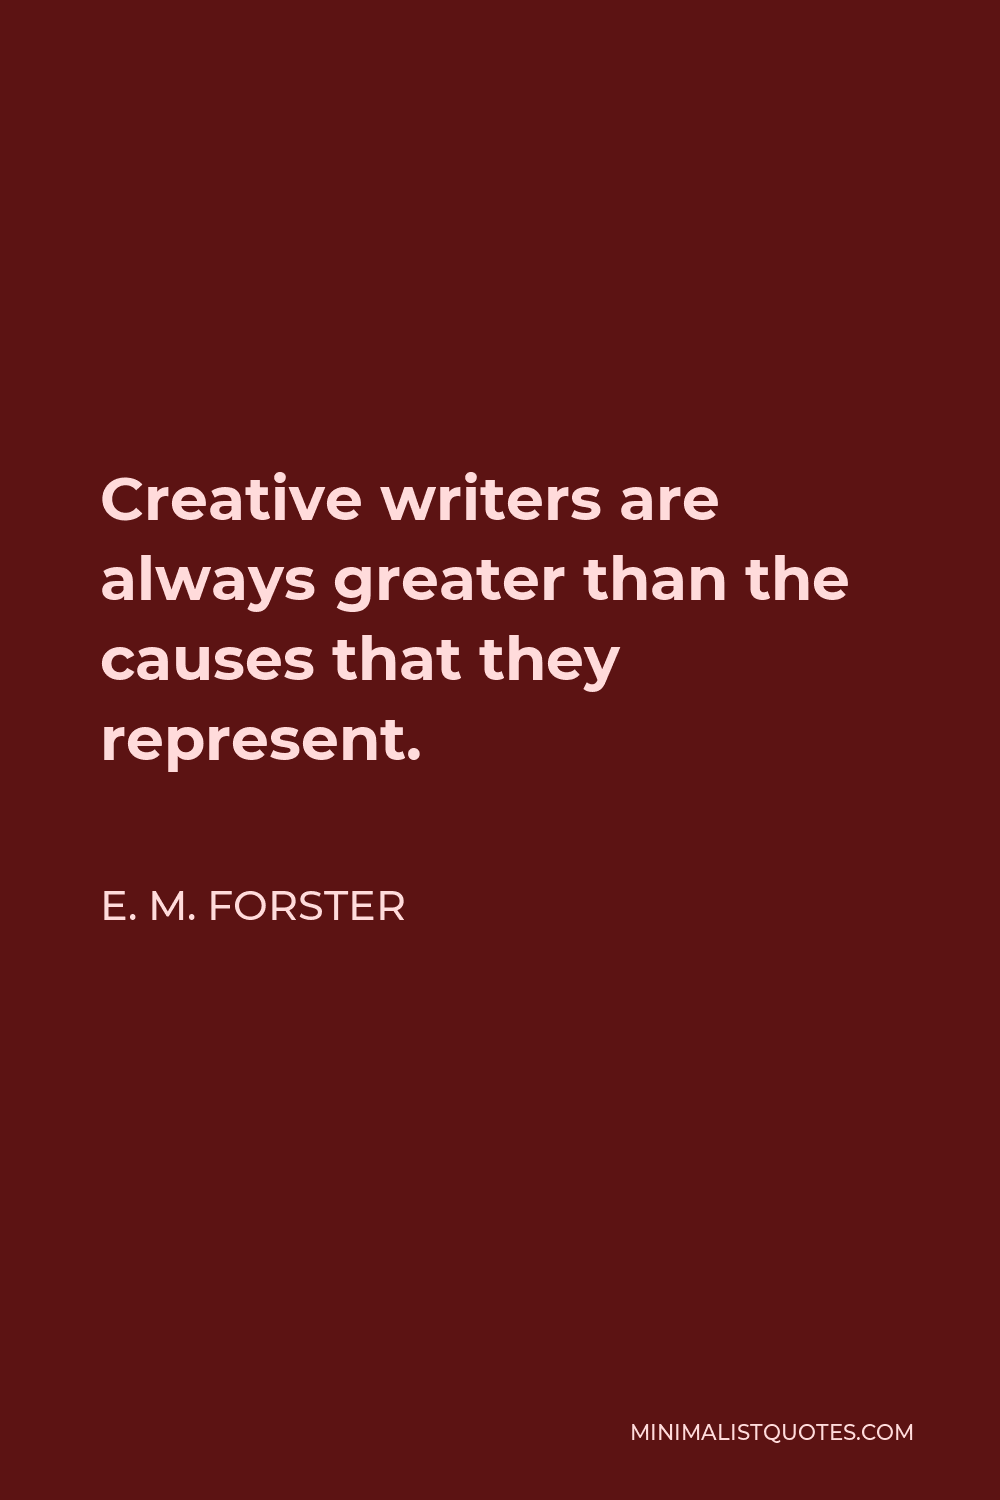 E. M. Forster Quote - Creative writers are always greater than the causes that they represent.